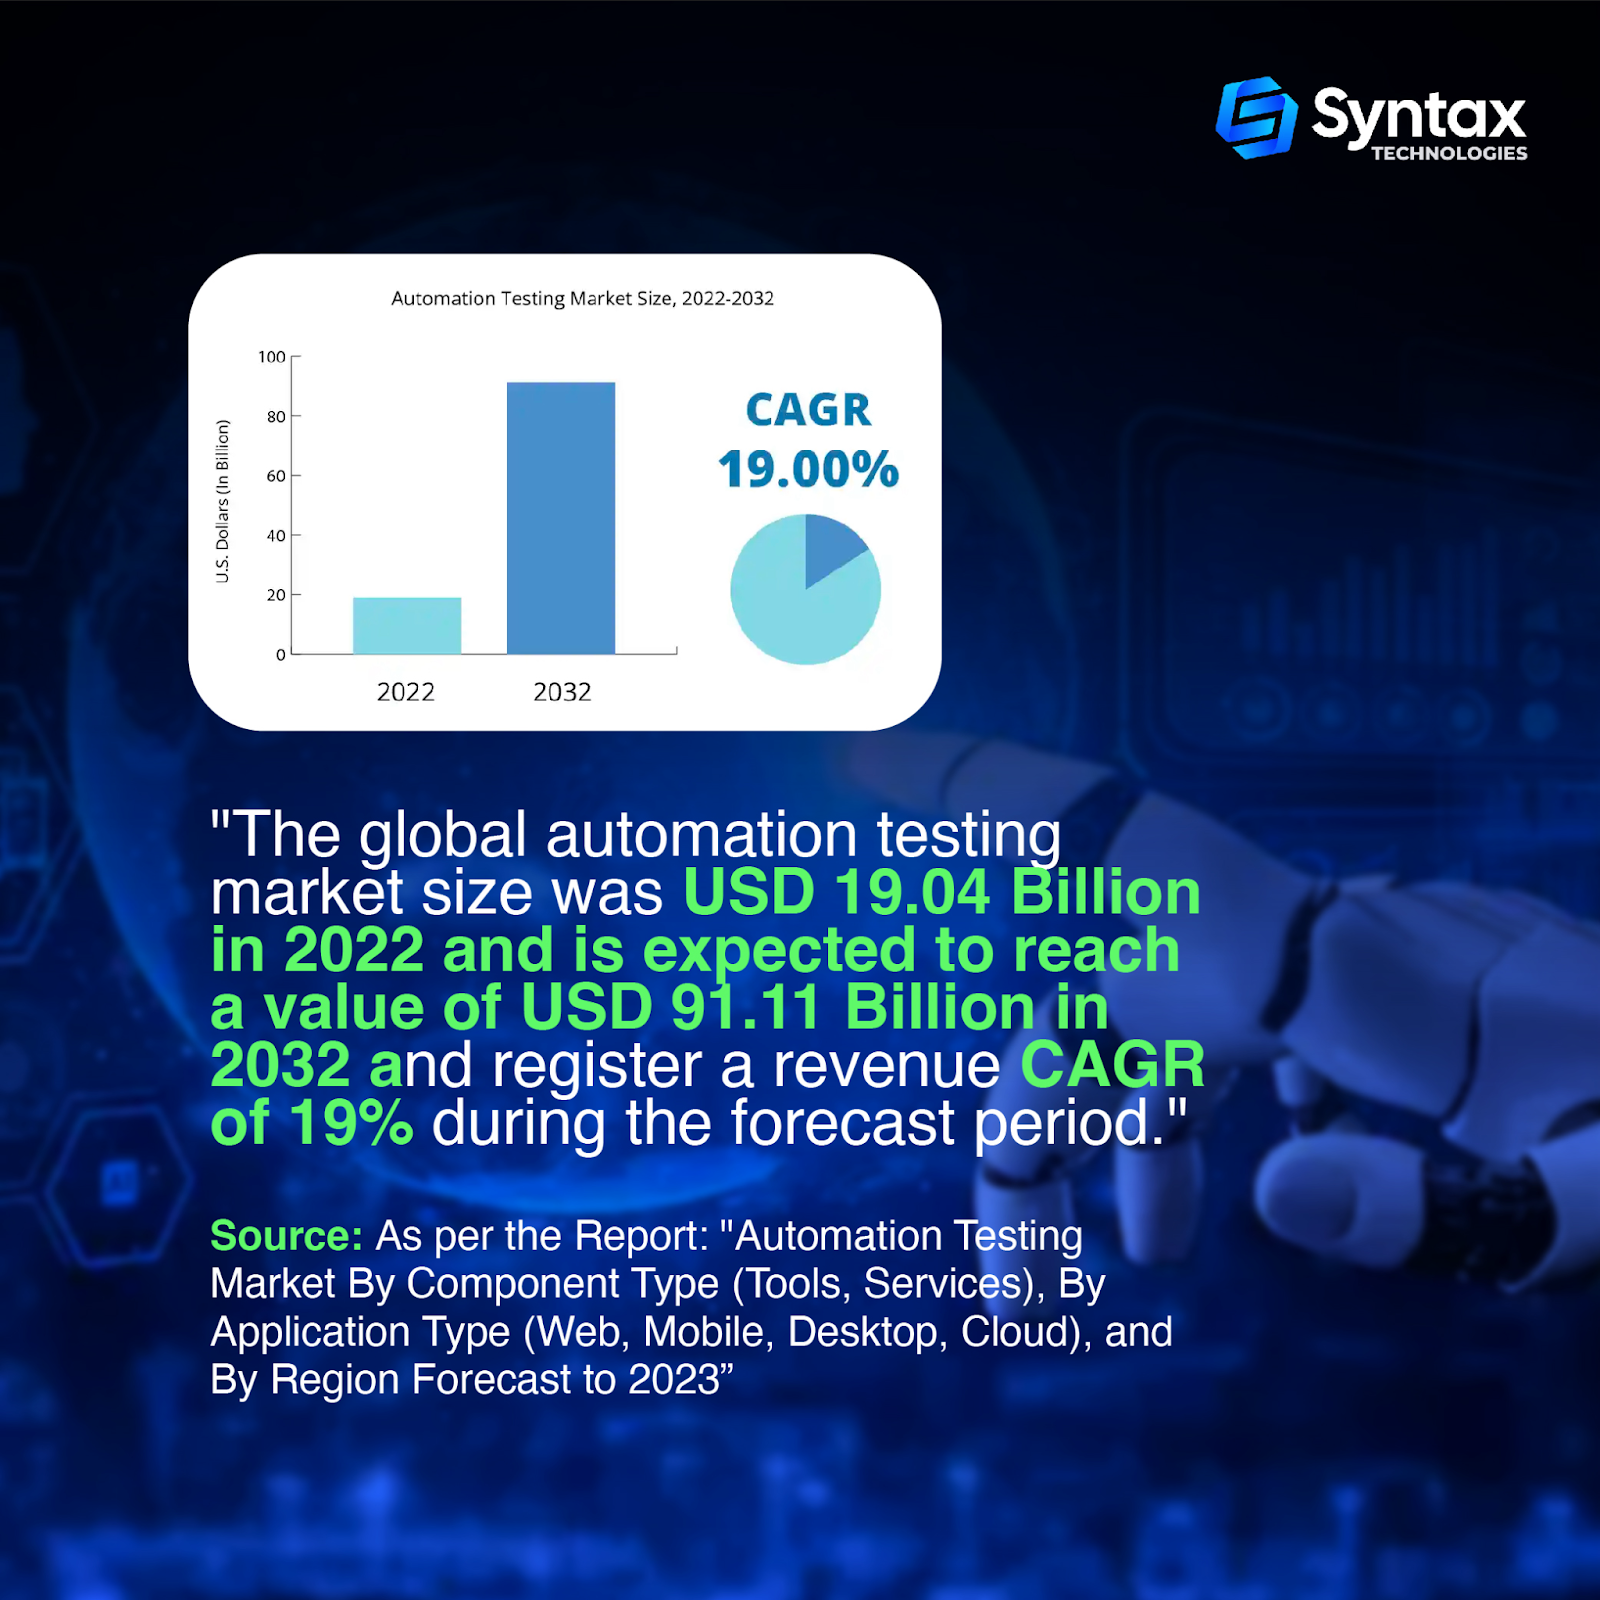 the global automation testing market size was usd 19.04 billion in 2022 and is expected to reach a value of usd 91.11 billion in 2032